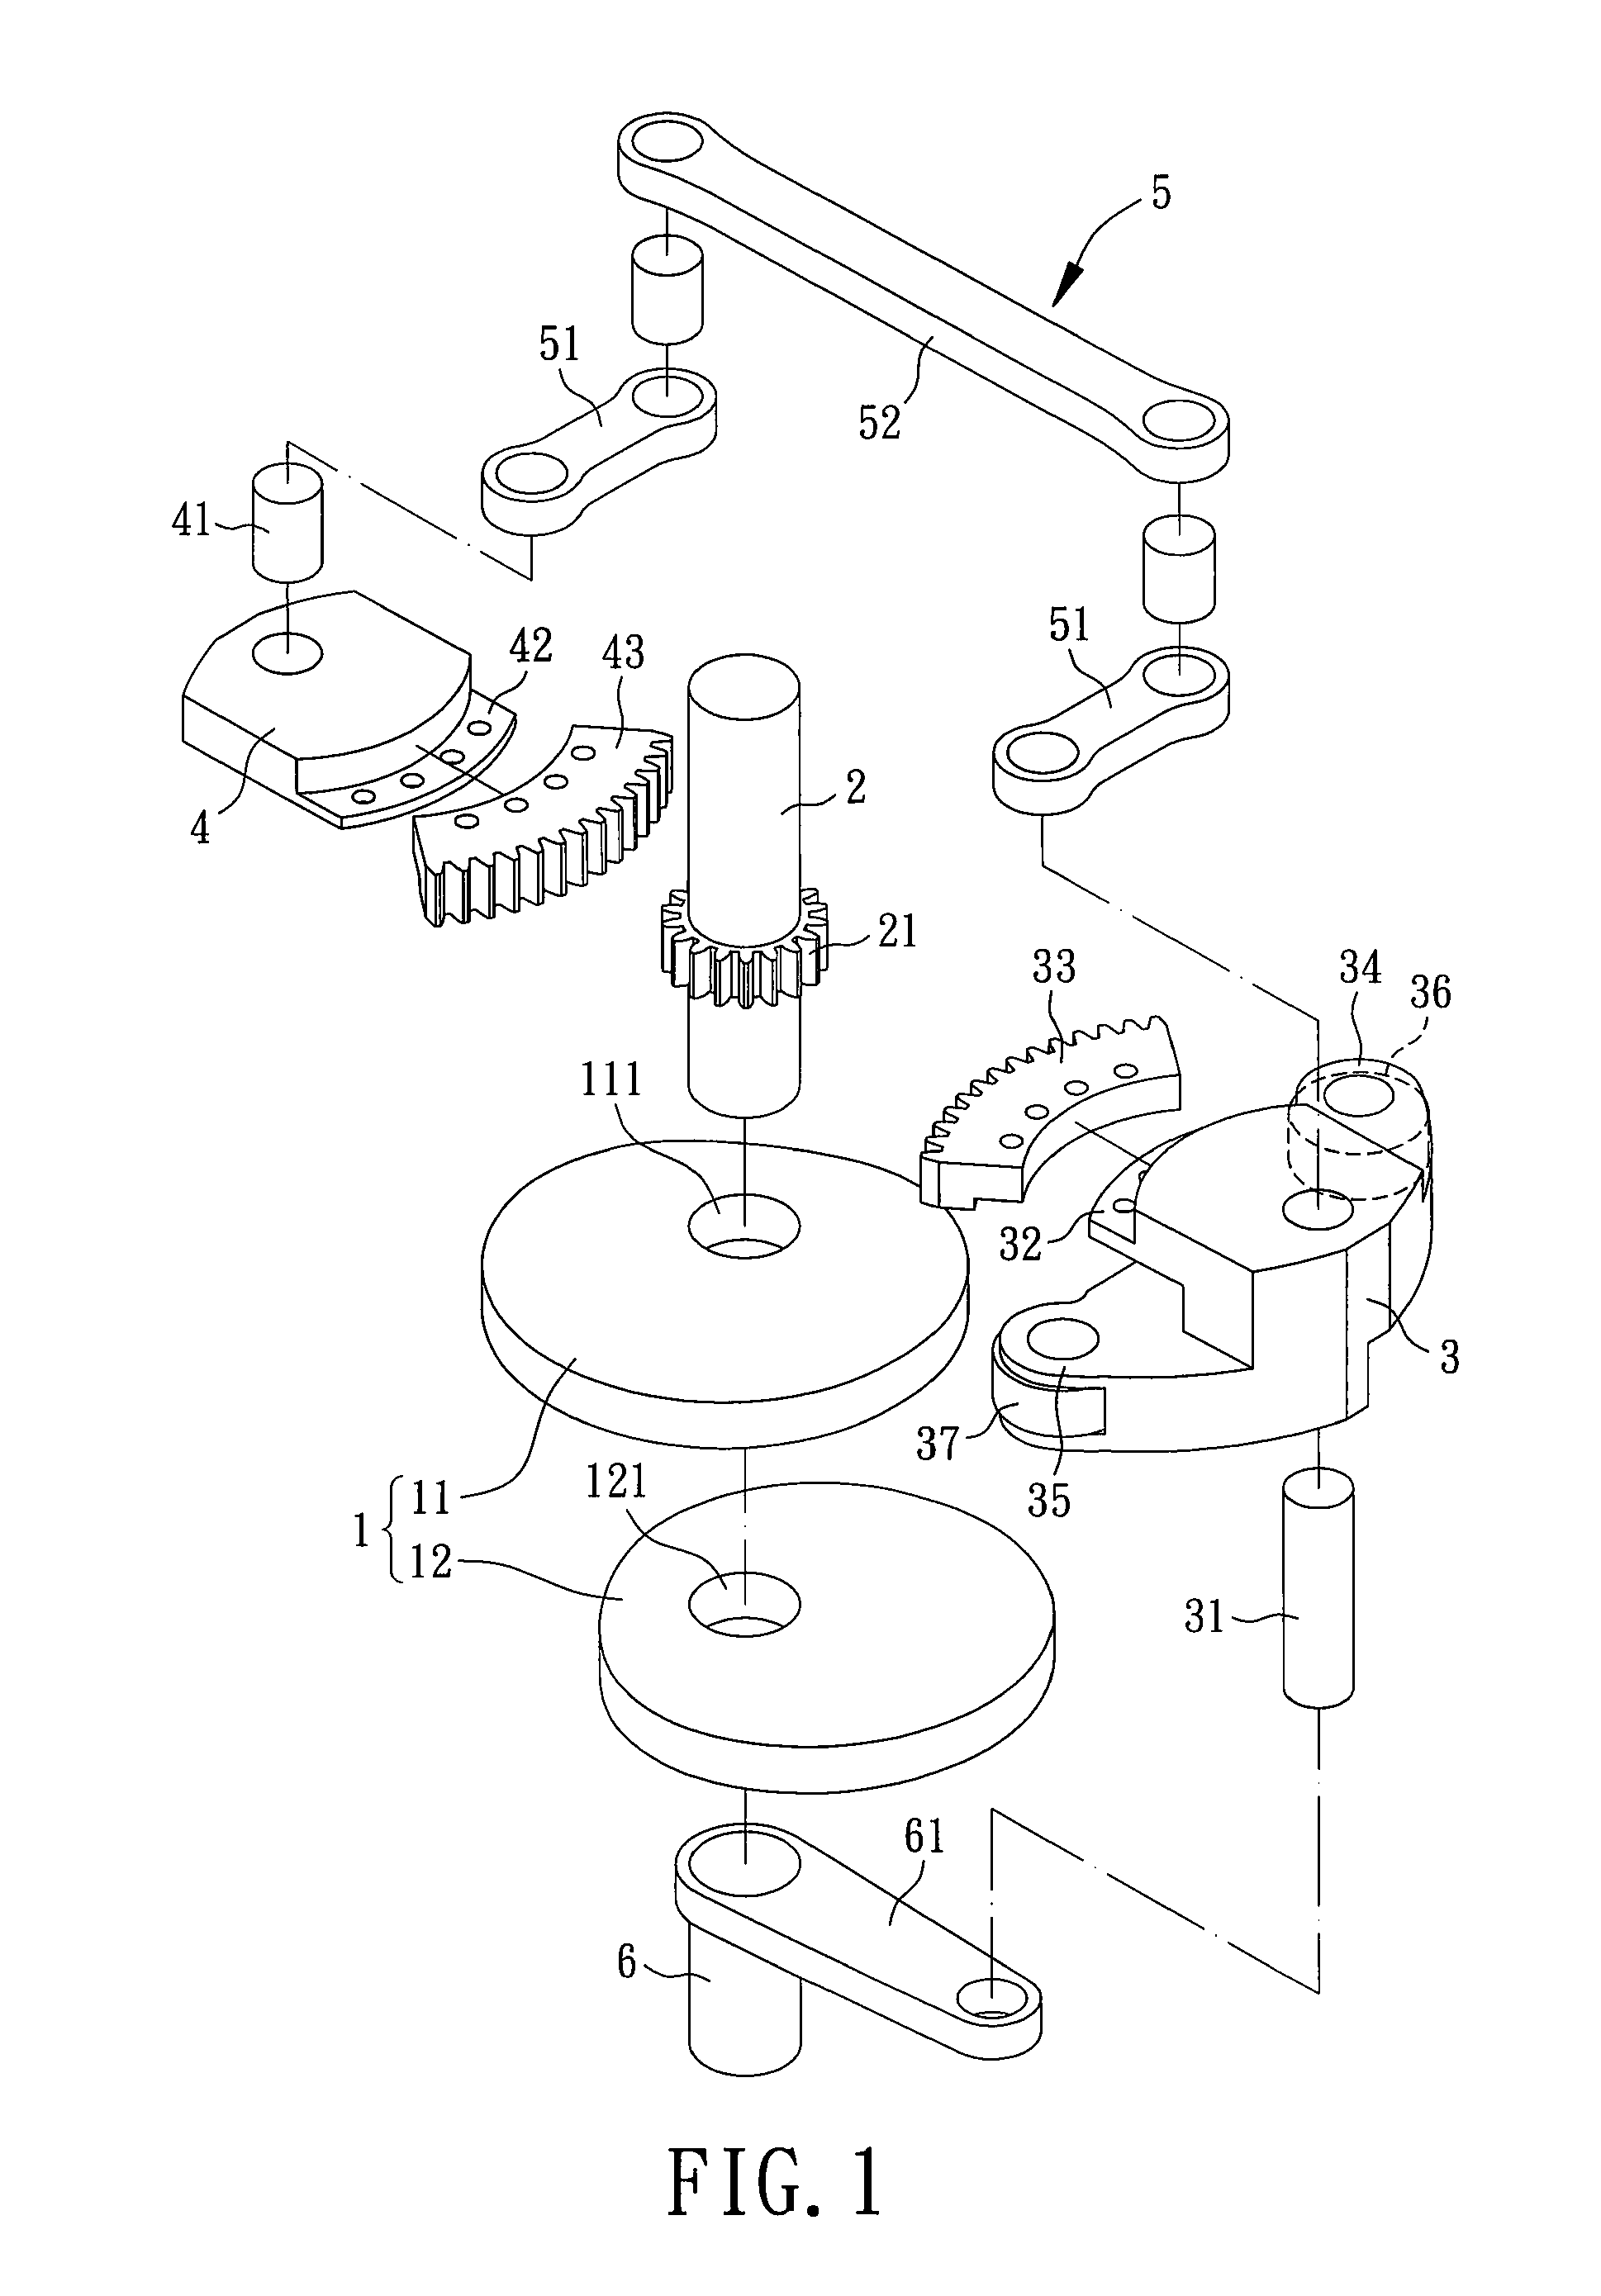 Transmission mechanism with intermittent output movement